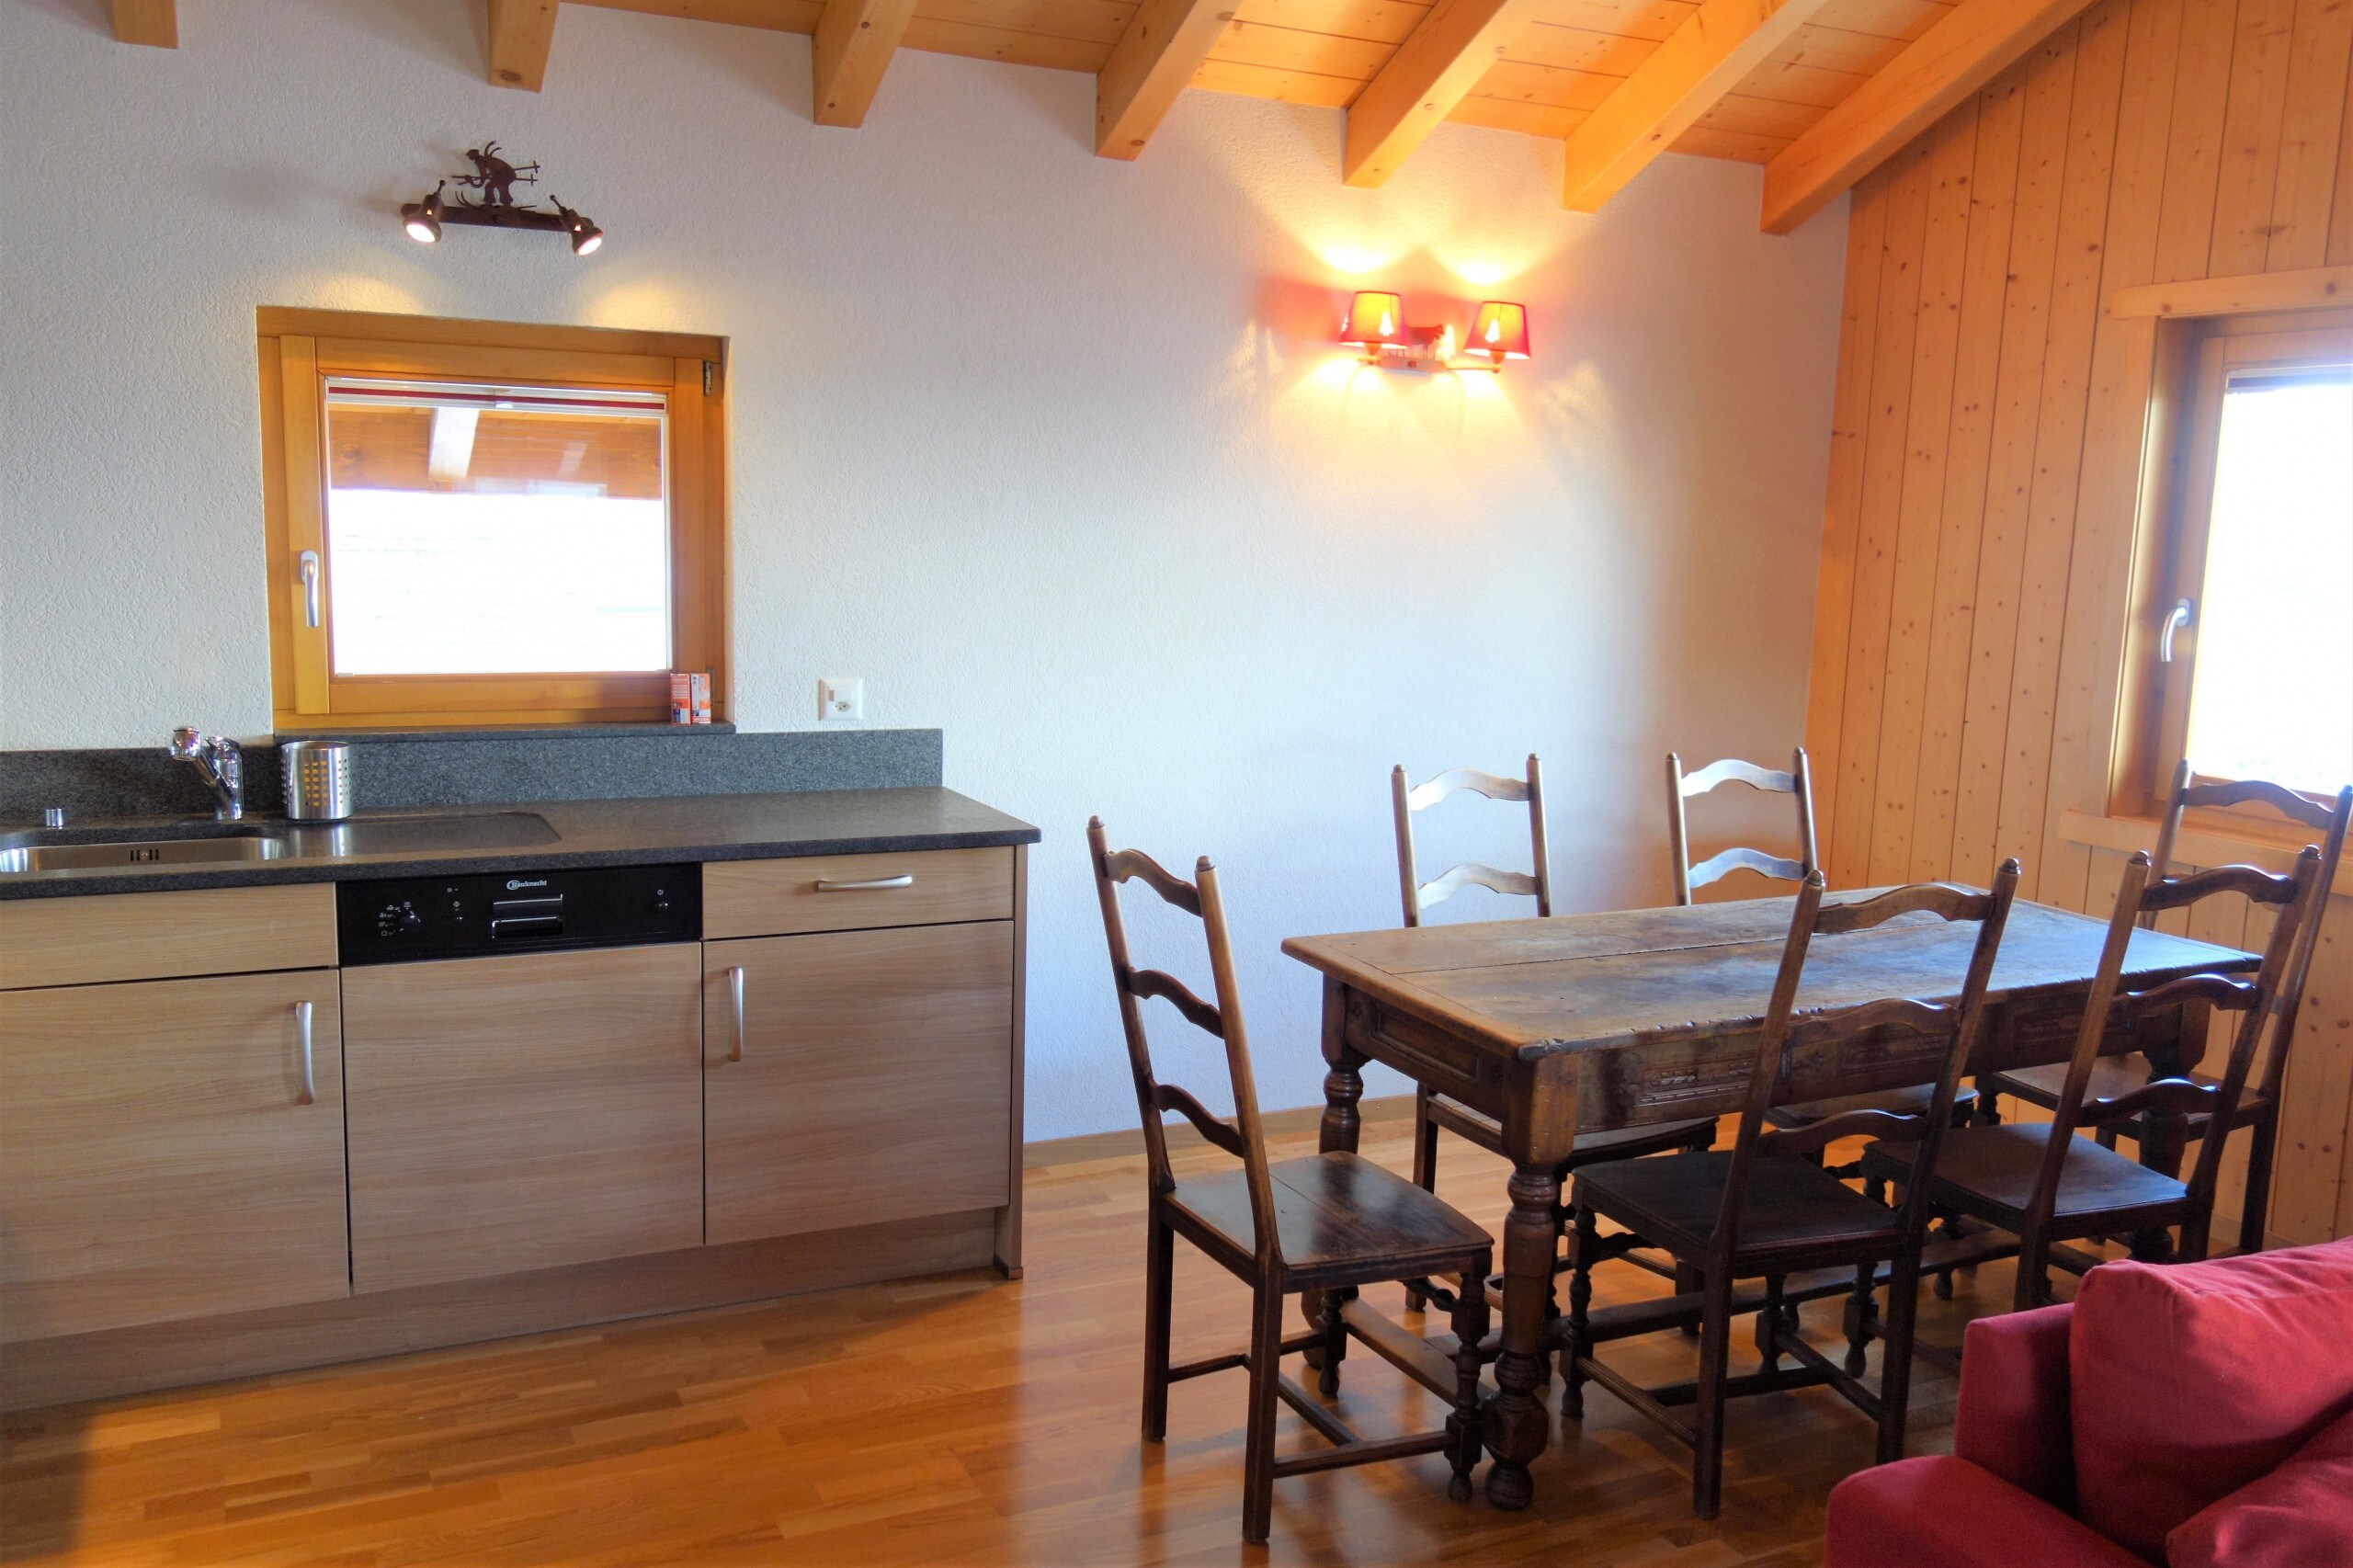 Property Image 2 - Authentic Chalet near Ski Slope with Modern Kitchen